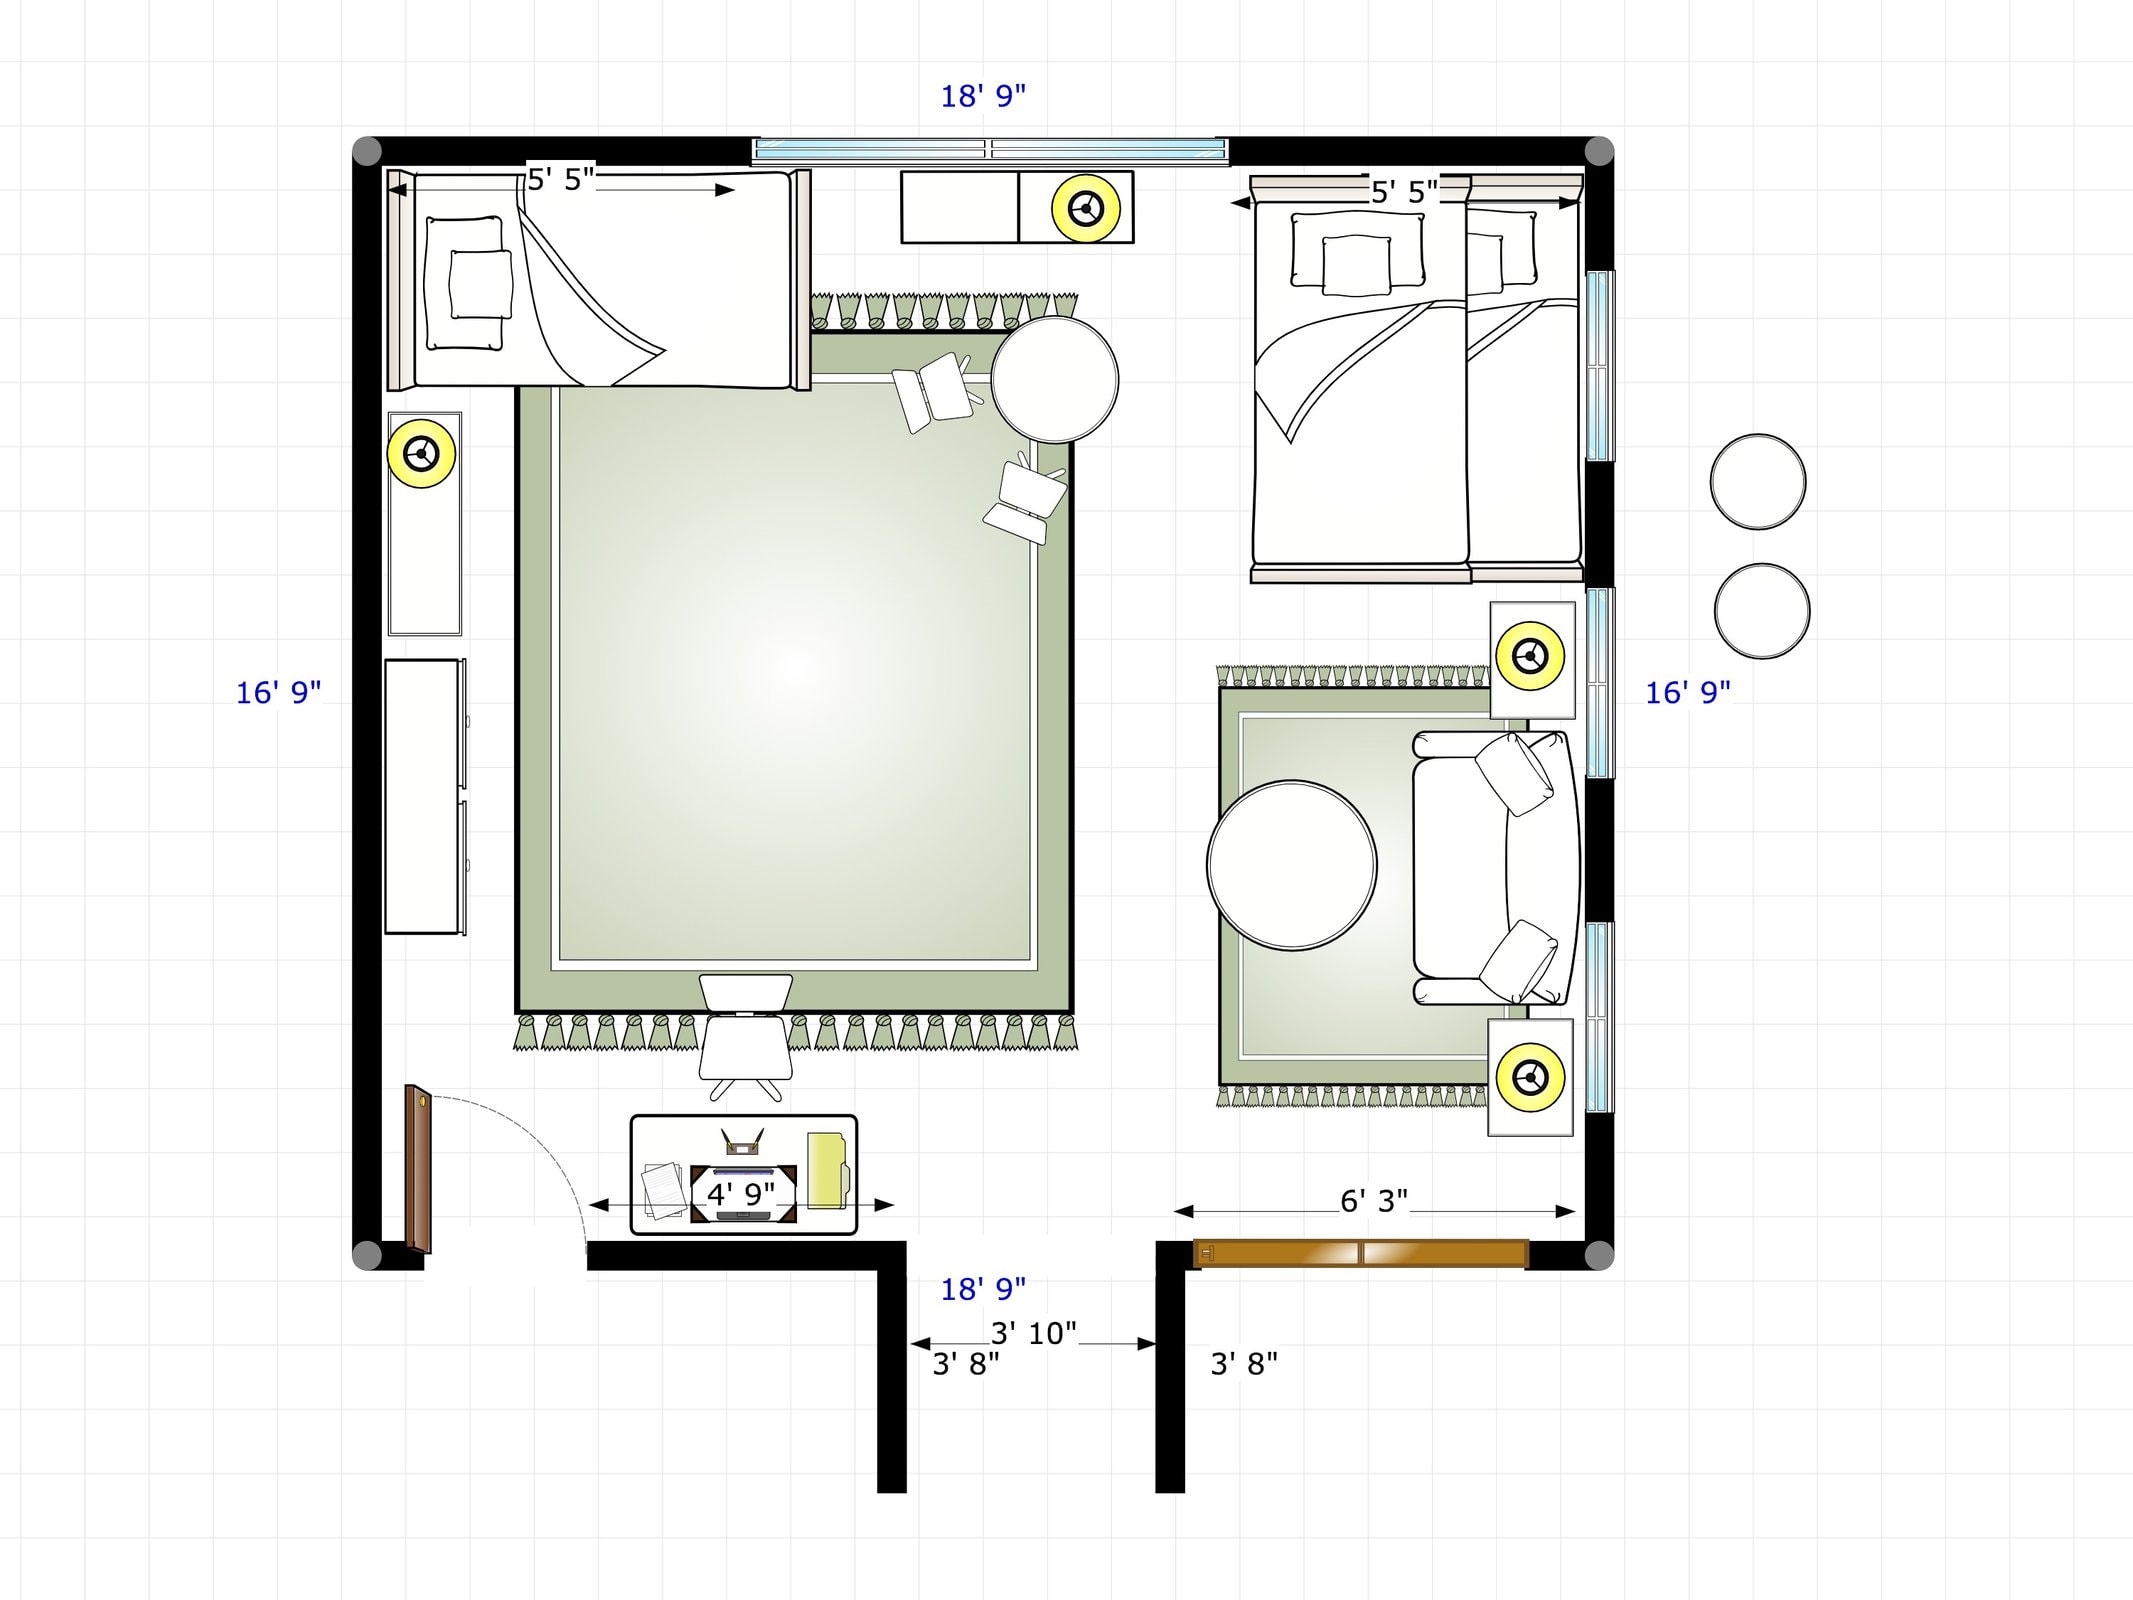 furniture layout for women's shelter